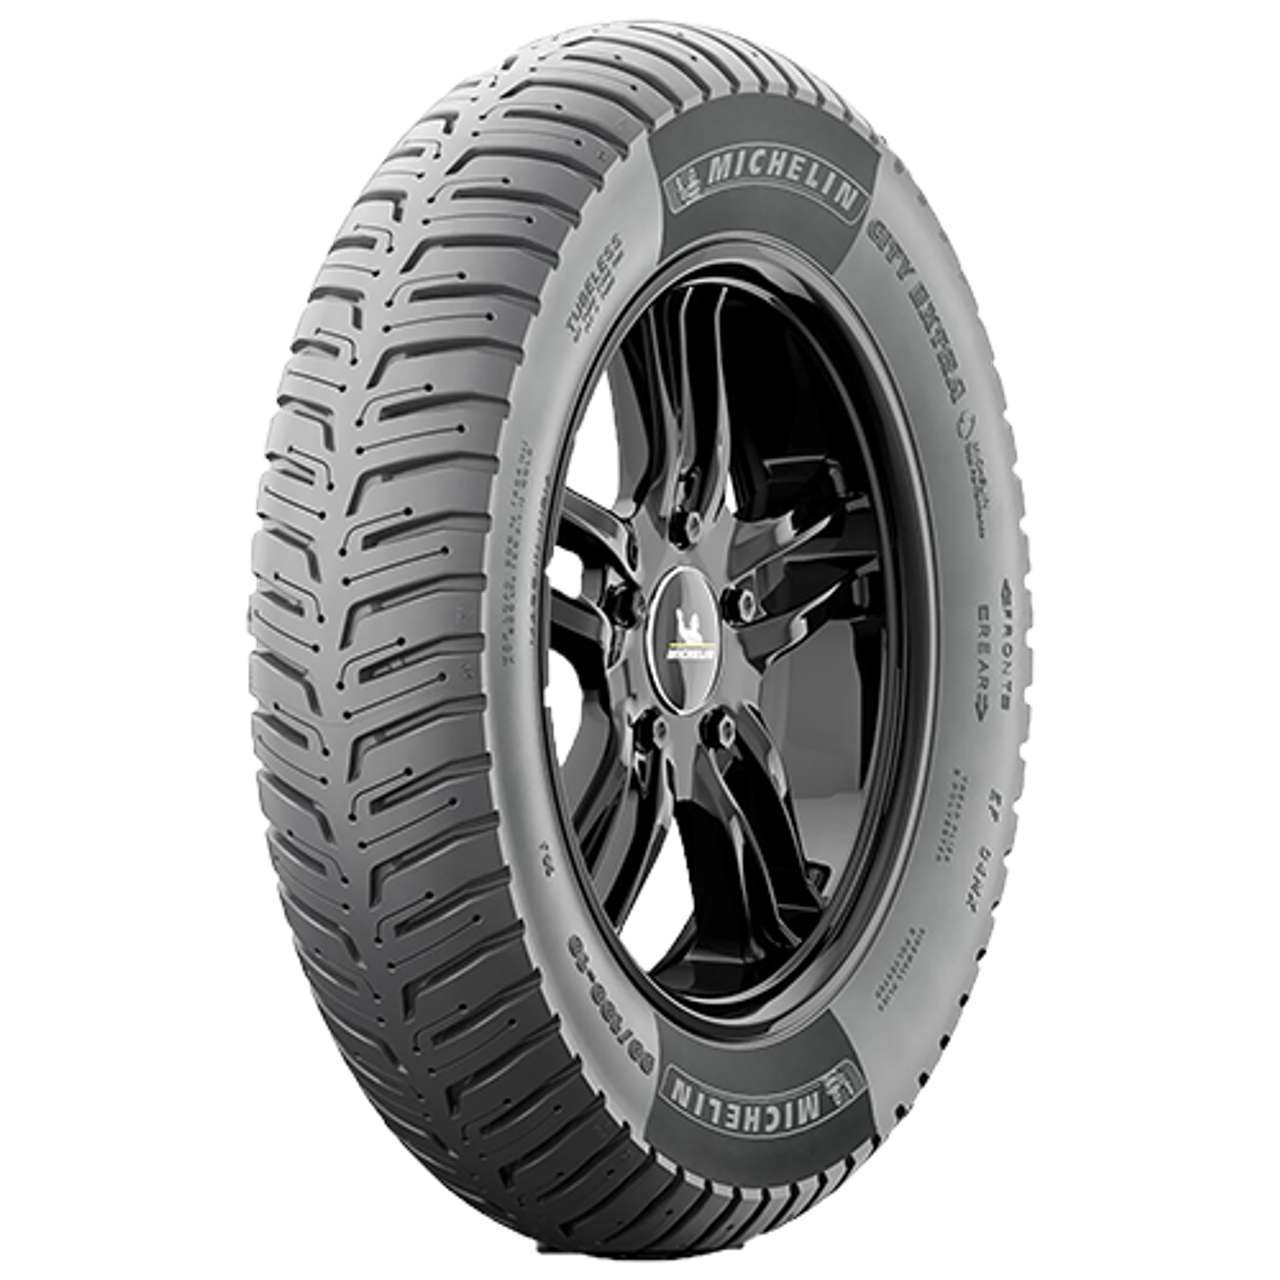 MICHELIN CITY EXTRA 90/80 - 16 M/C XL TL 51S FRONT/REAR